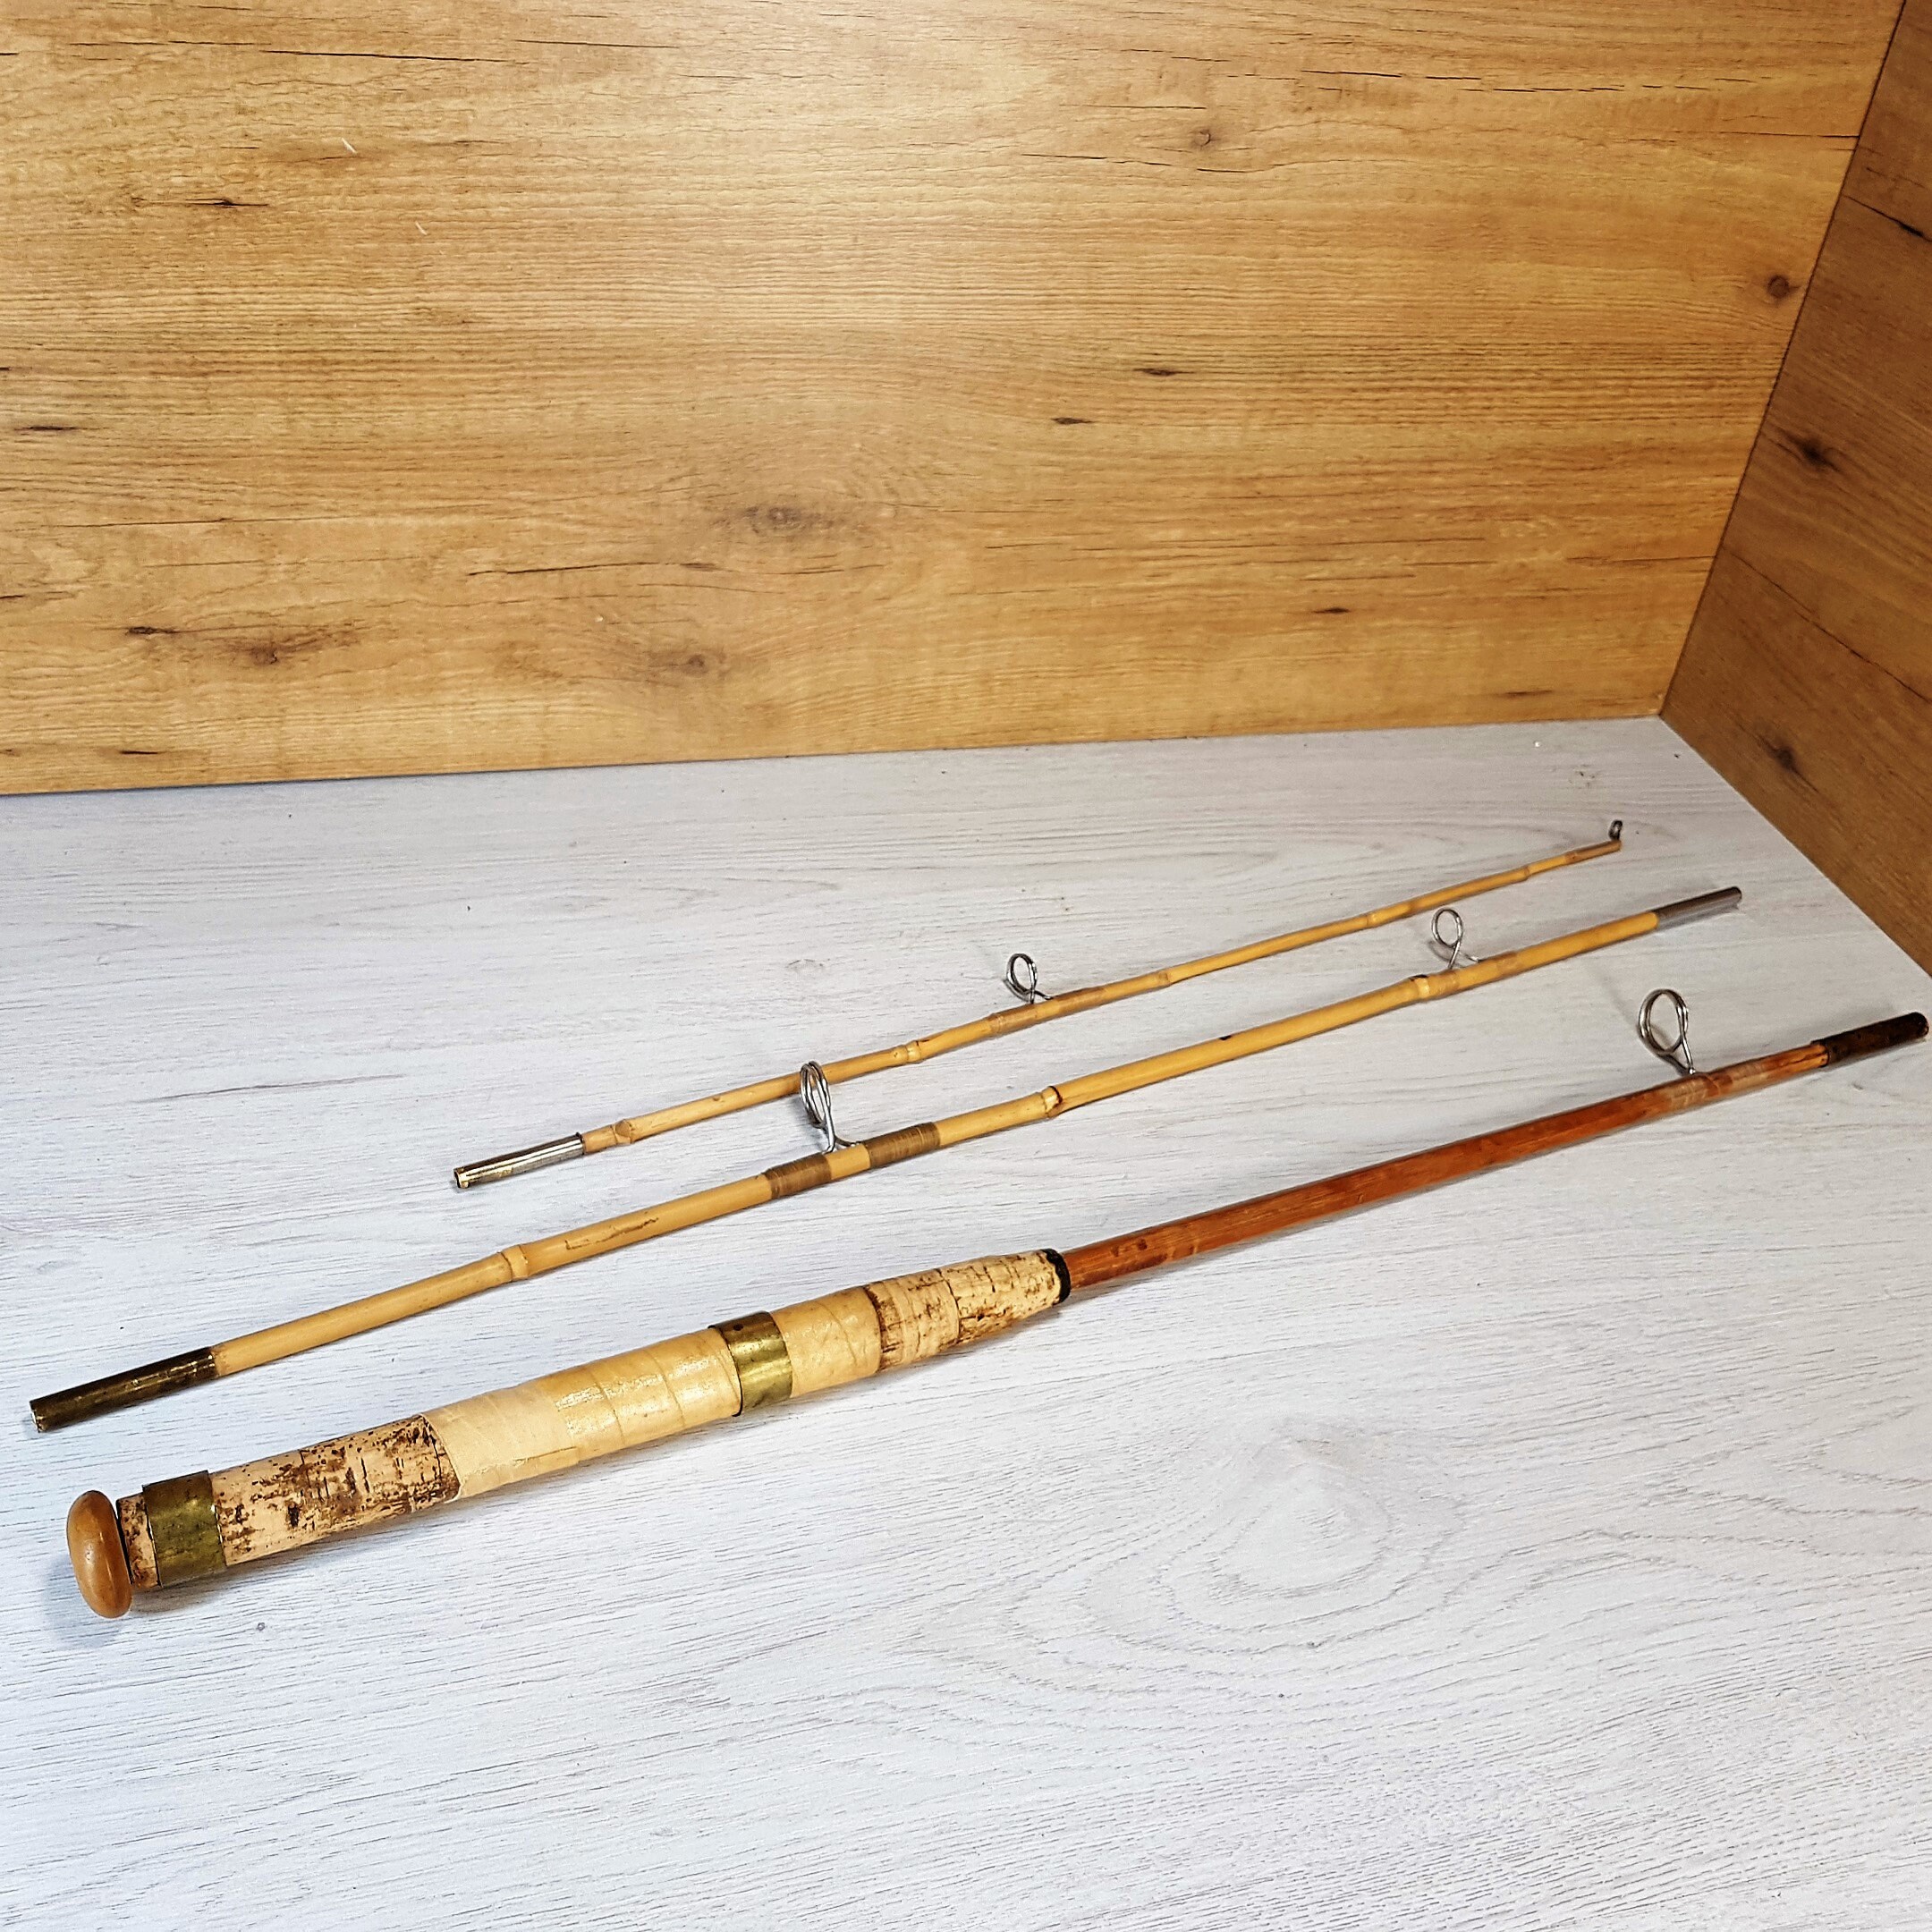 Bamboo Fishing Rod, Vintage Fishing Rod, Special Gift, Collection Fishing,  Old Fishing Equipment, Split Bamboo Rod for Fish, Fishing Rod -  Israel